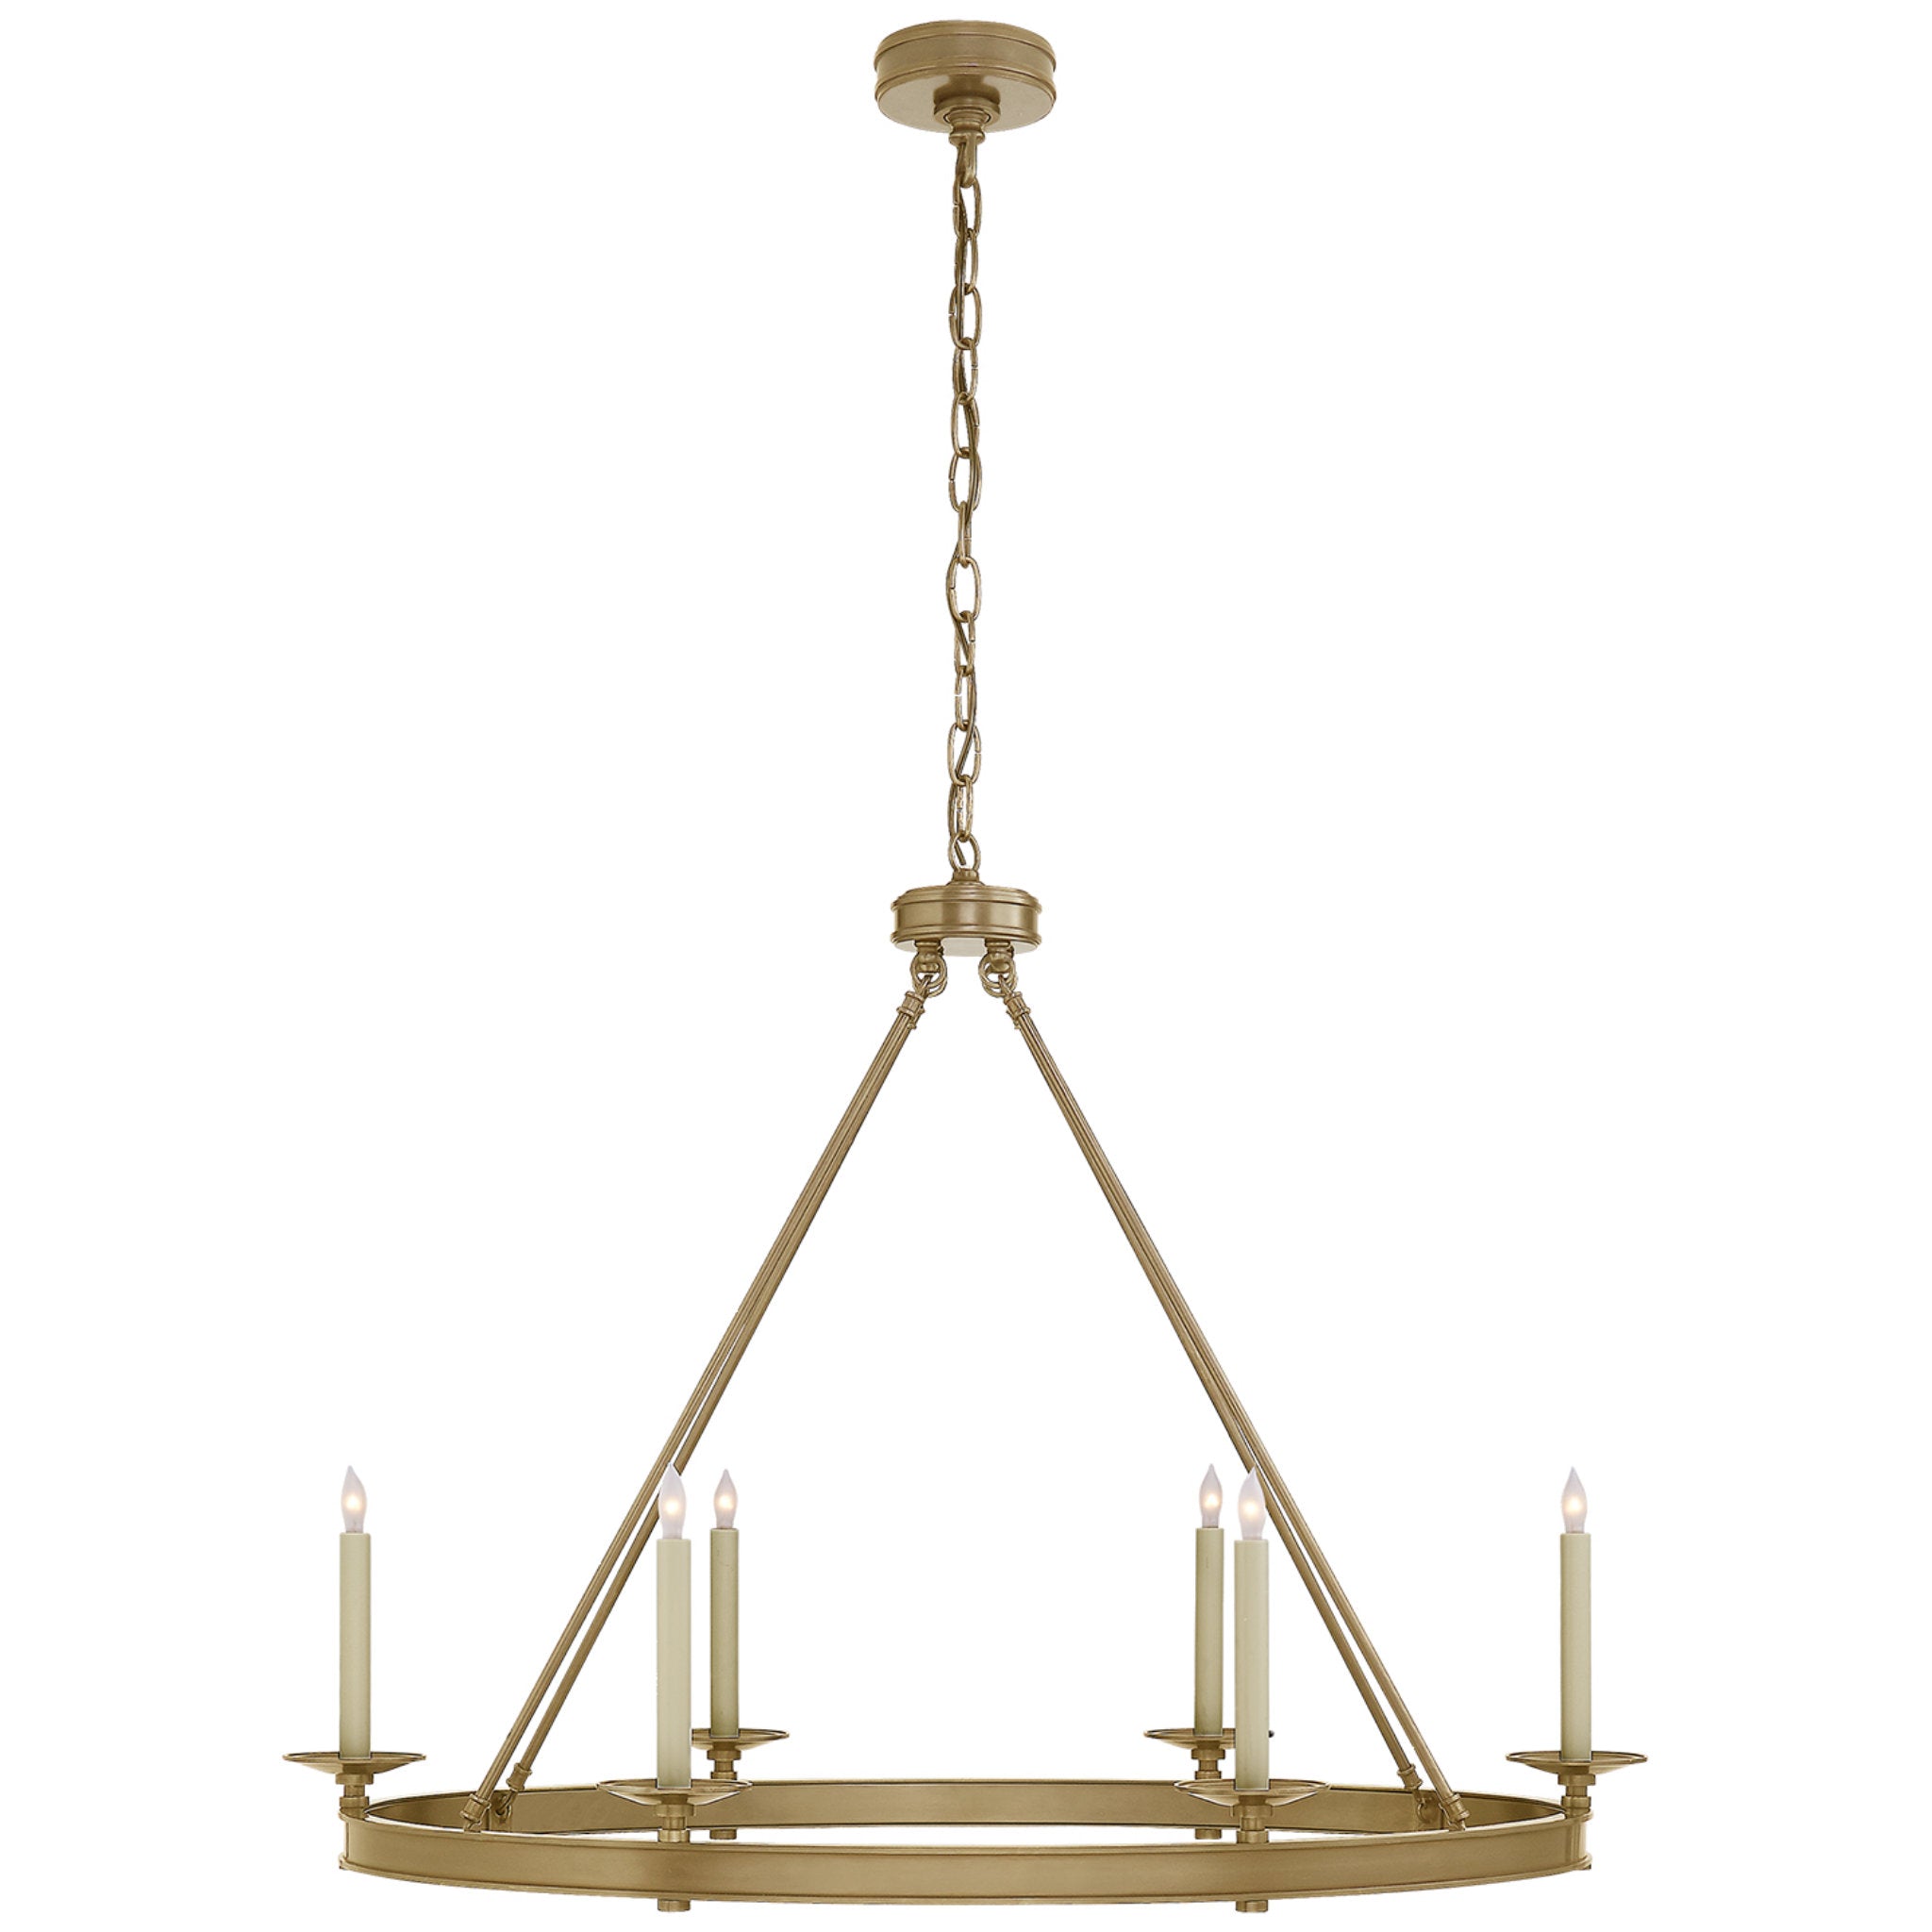 Chapman & Myers Launceton Large Oval Chandelier in Antique- Burnished Brass